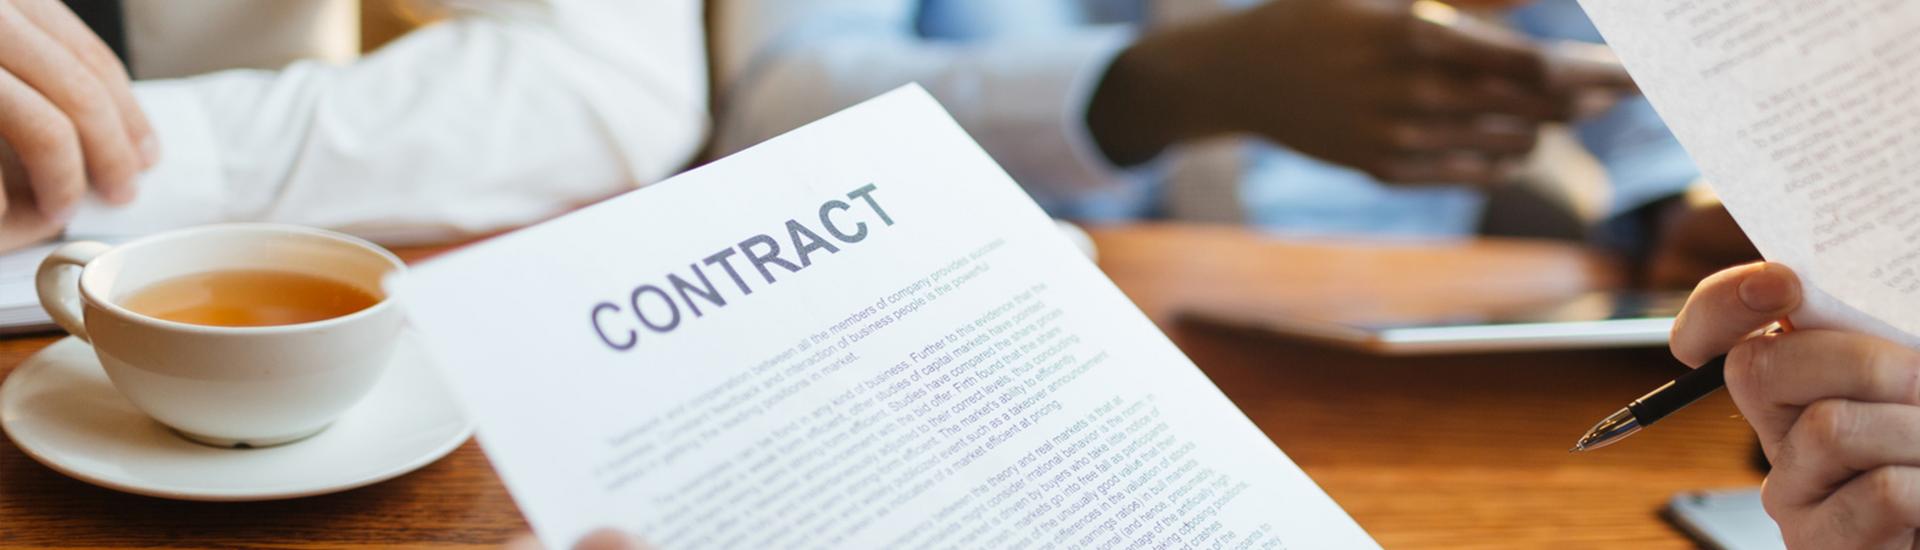 Contracts Banner Image